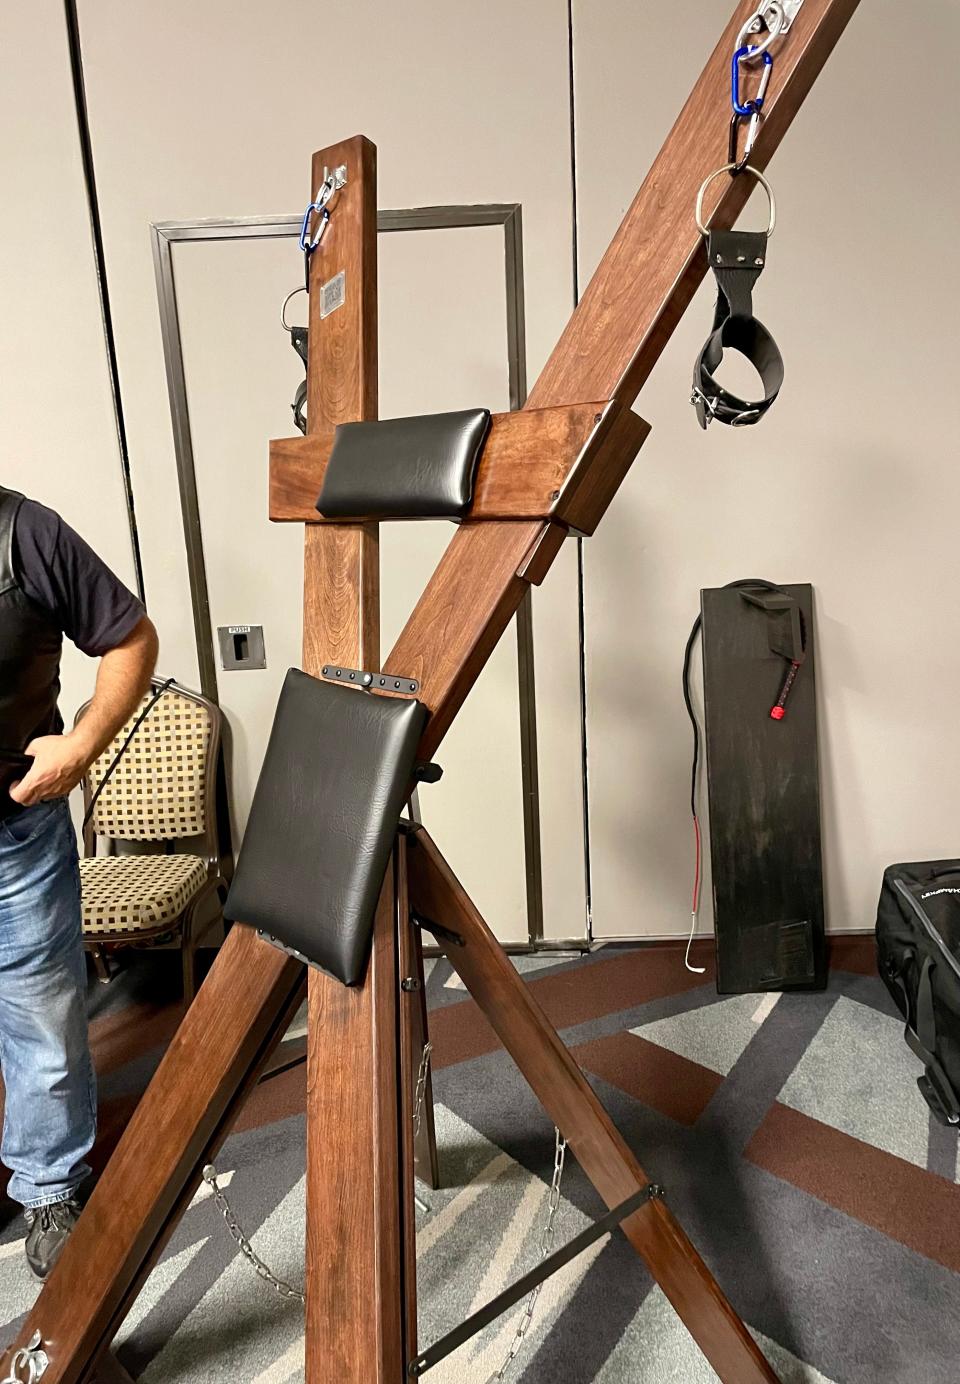 An X-frame made of wood and leather to be used in a BDSM dungeon was on sale from a vendor in April 2024 at the Rochester Erotic Arts Festival.